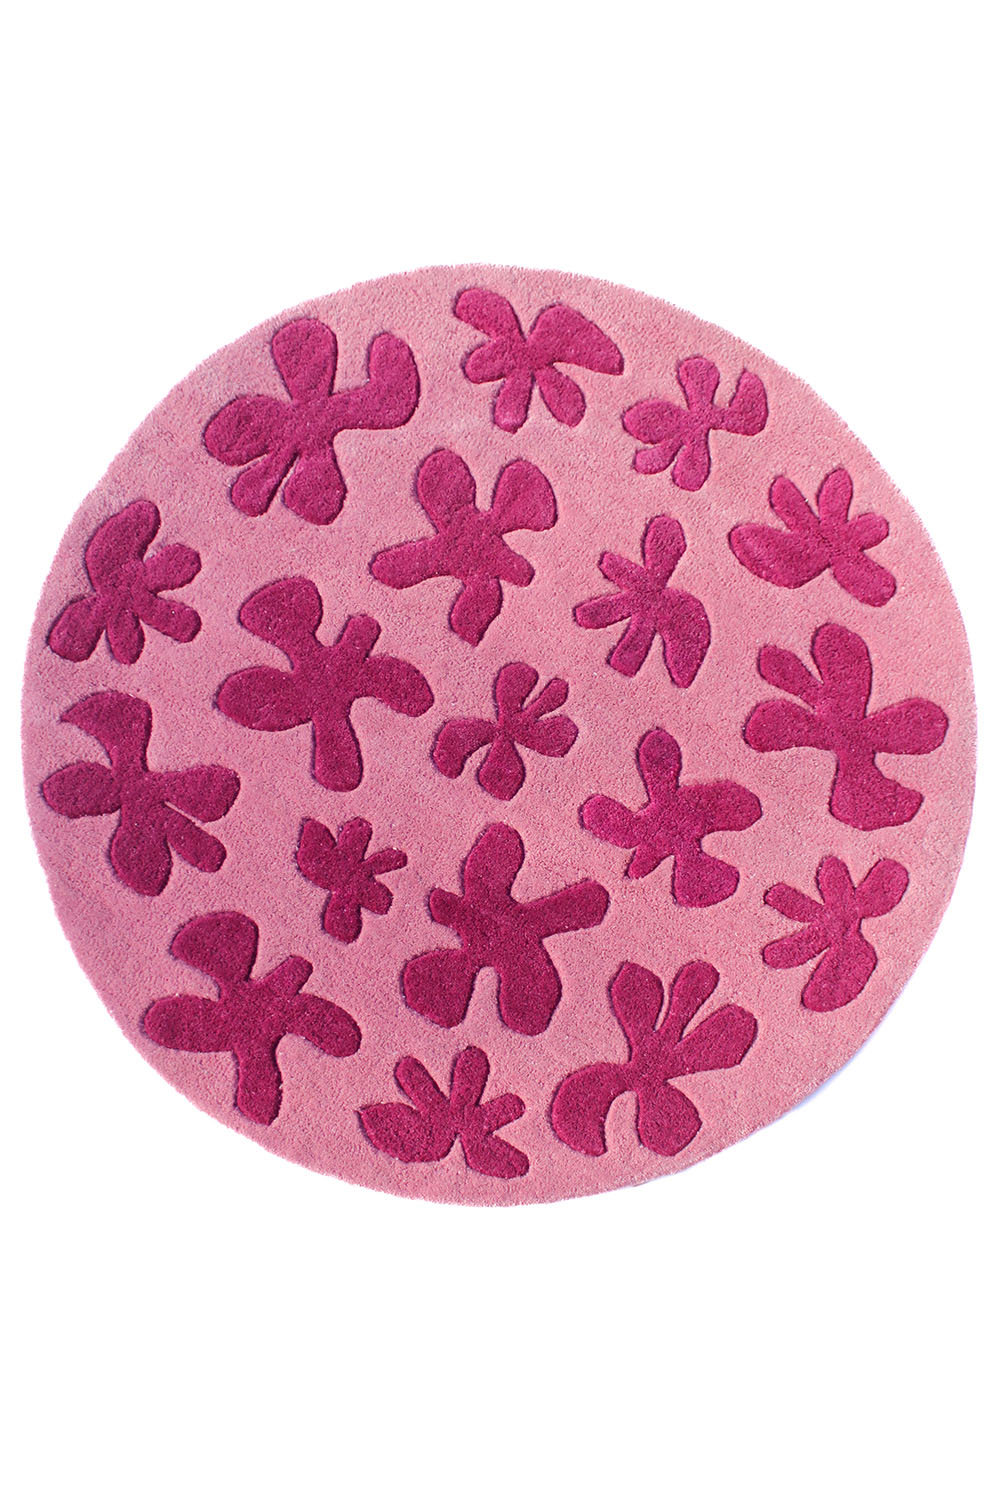 Floral Blossom Round Hand Tufted Wool Rug in Pink by Jubi